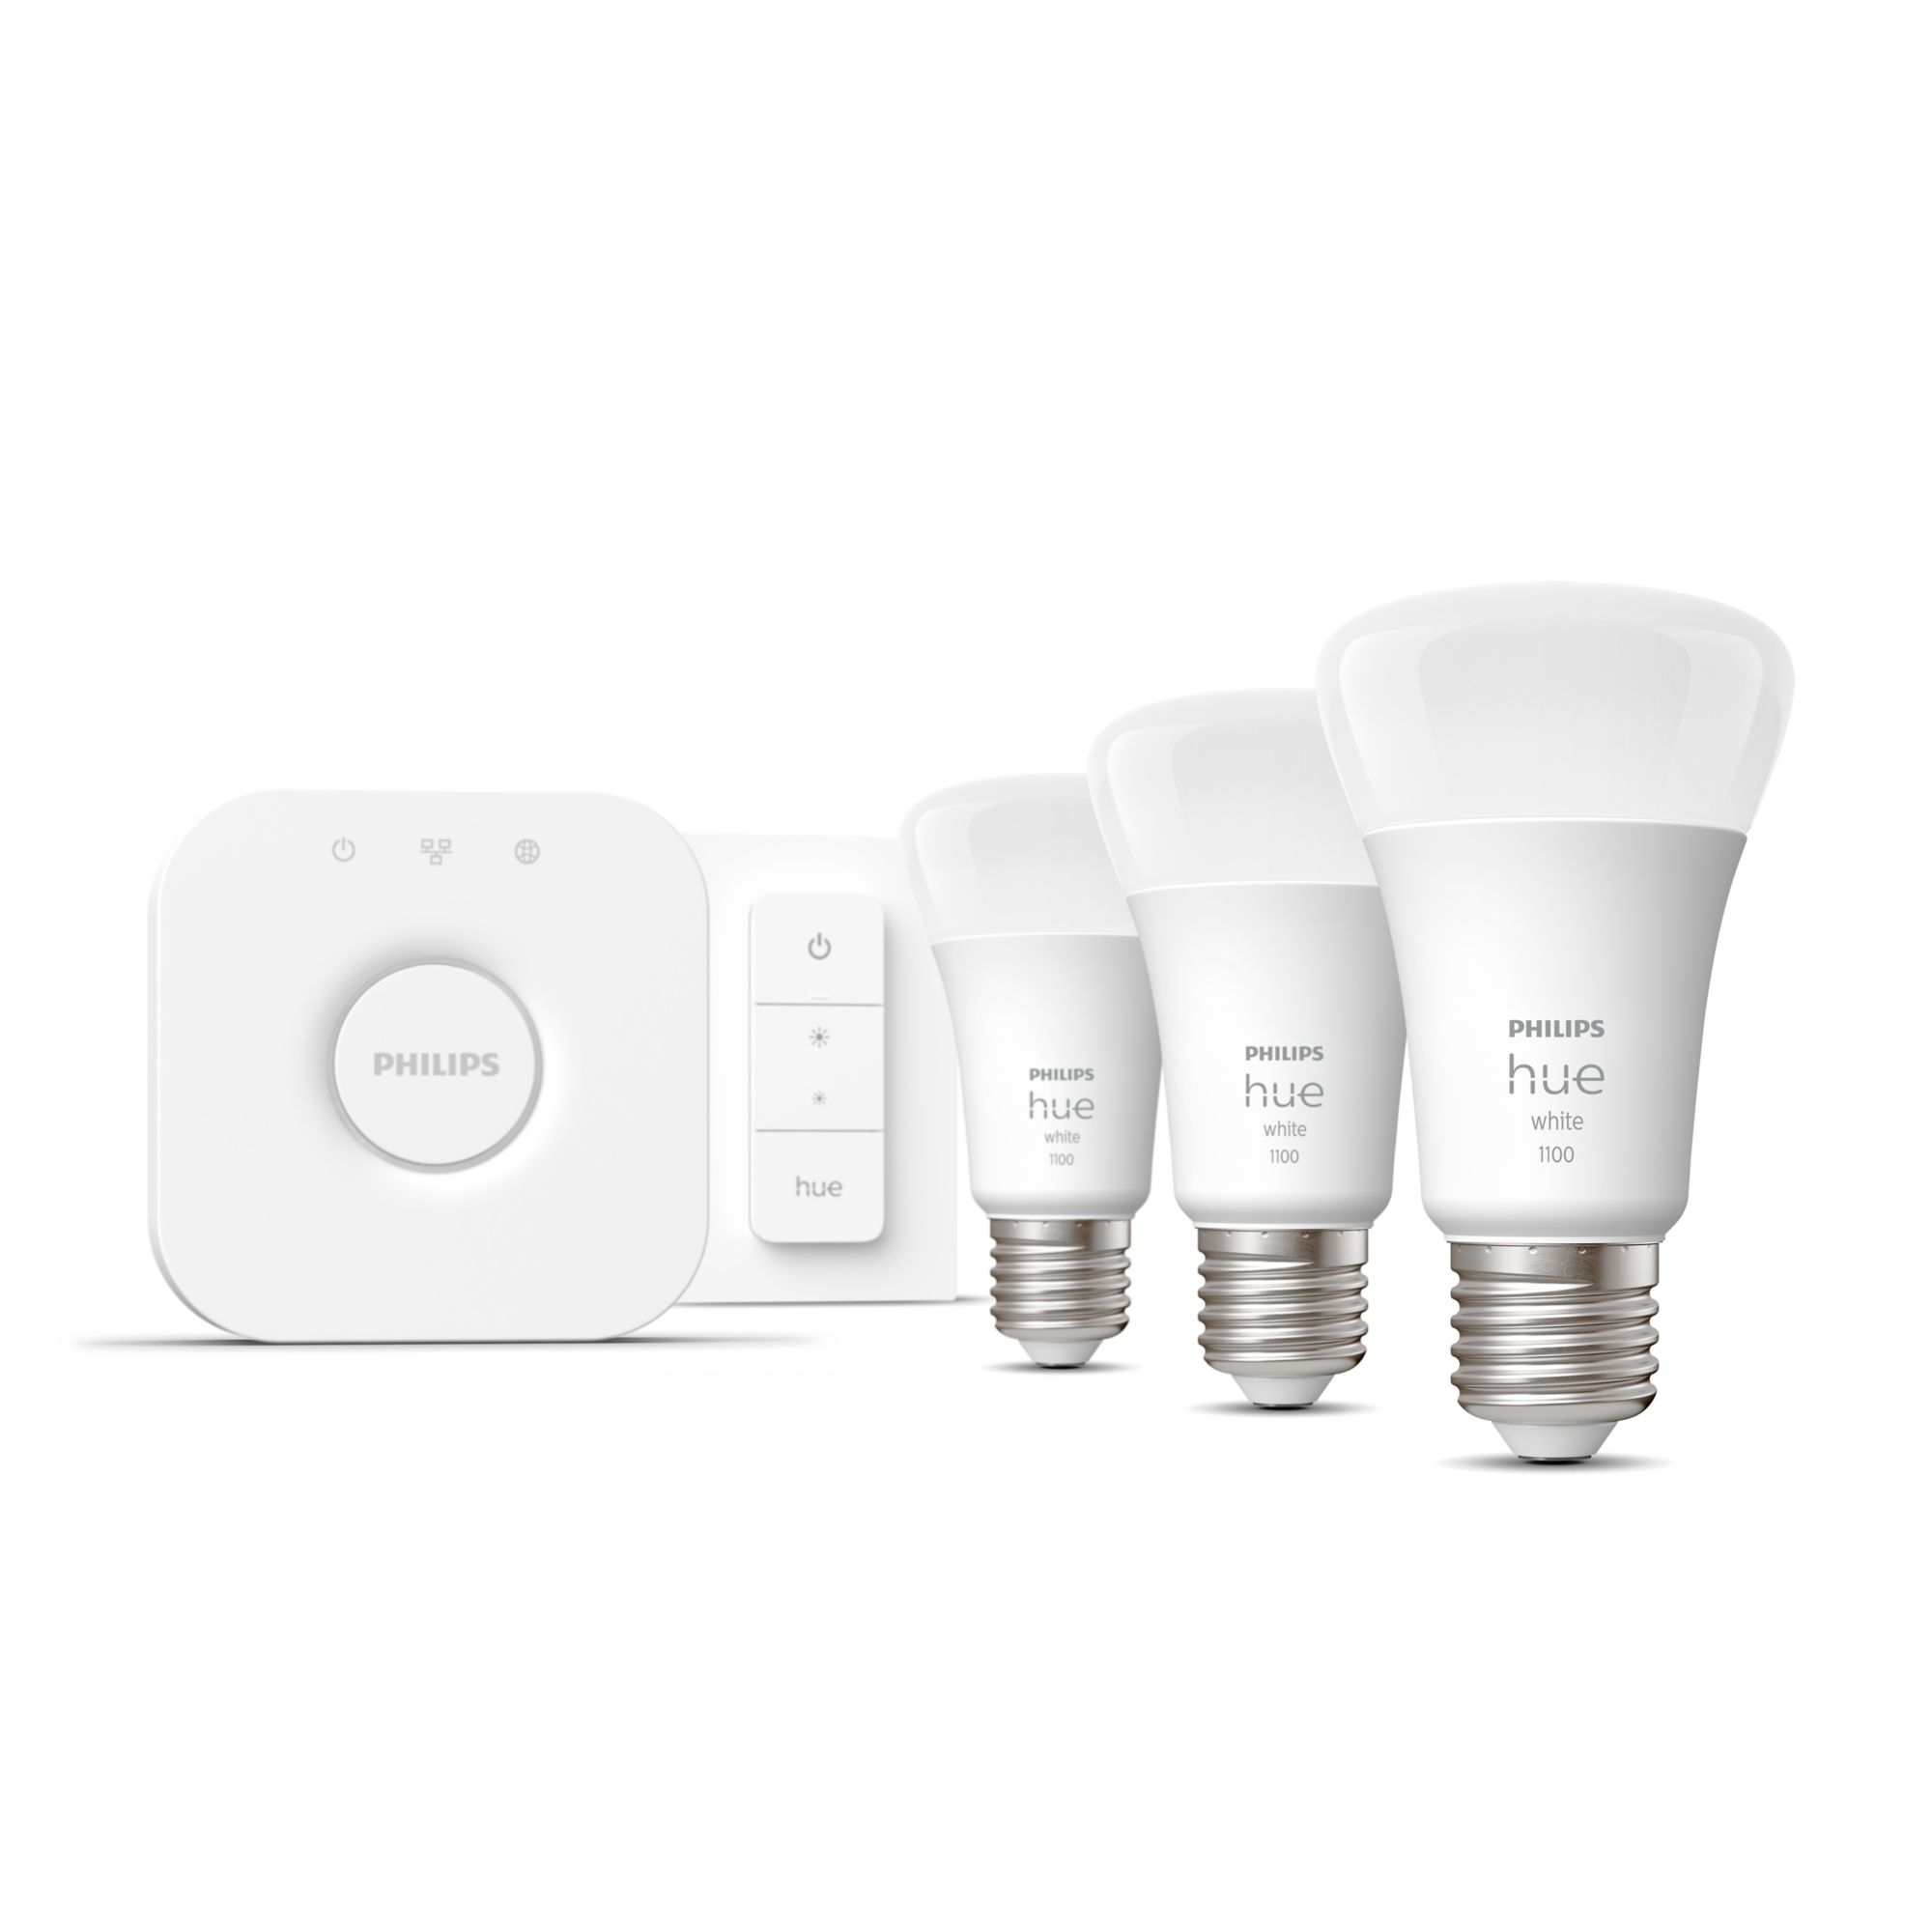 Philips by Signify Hue White Starter Kit Bridge + 3 Lampadine Smart E27 75W Dimmer Switch [929002469204]